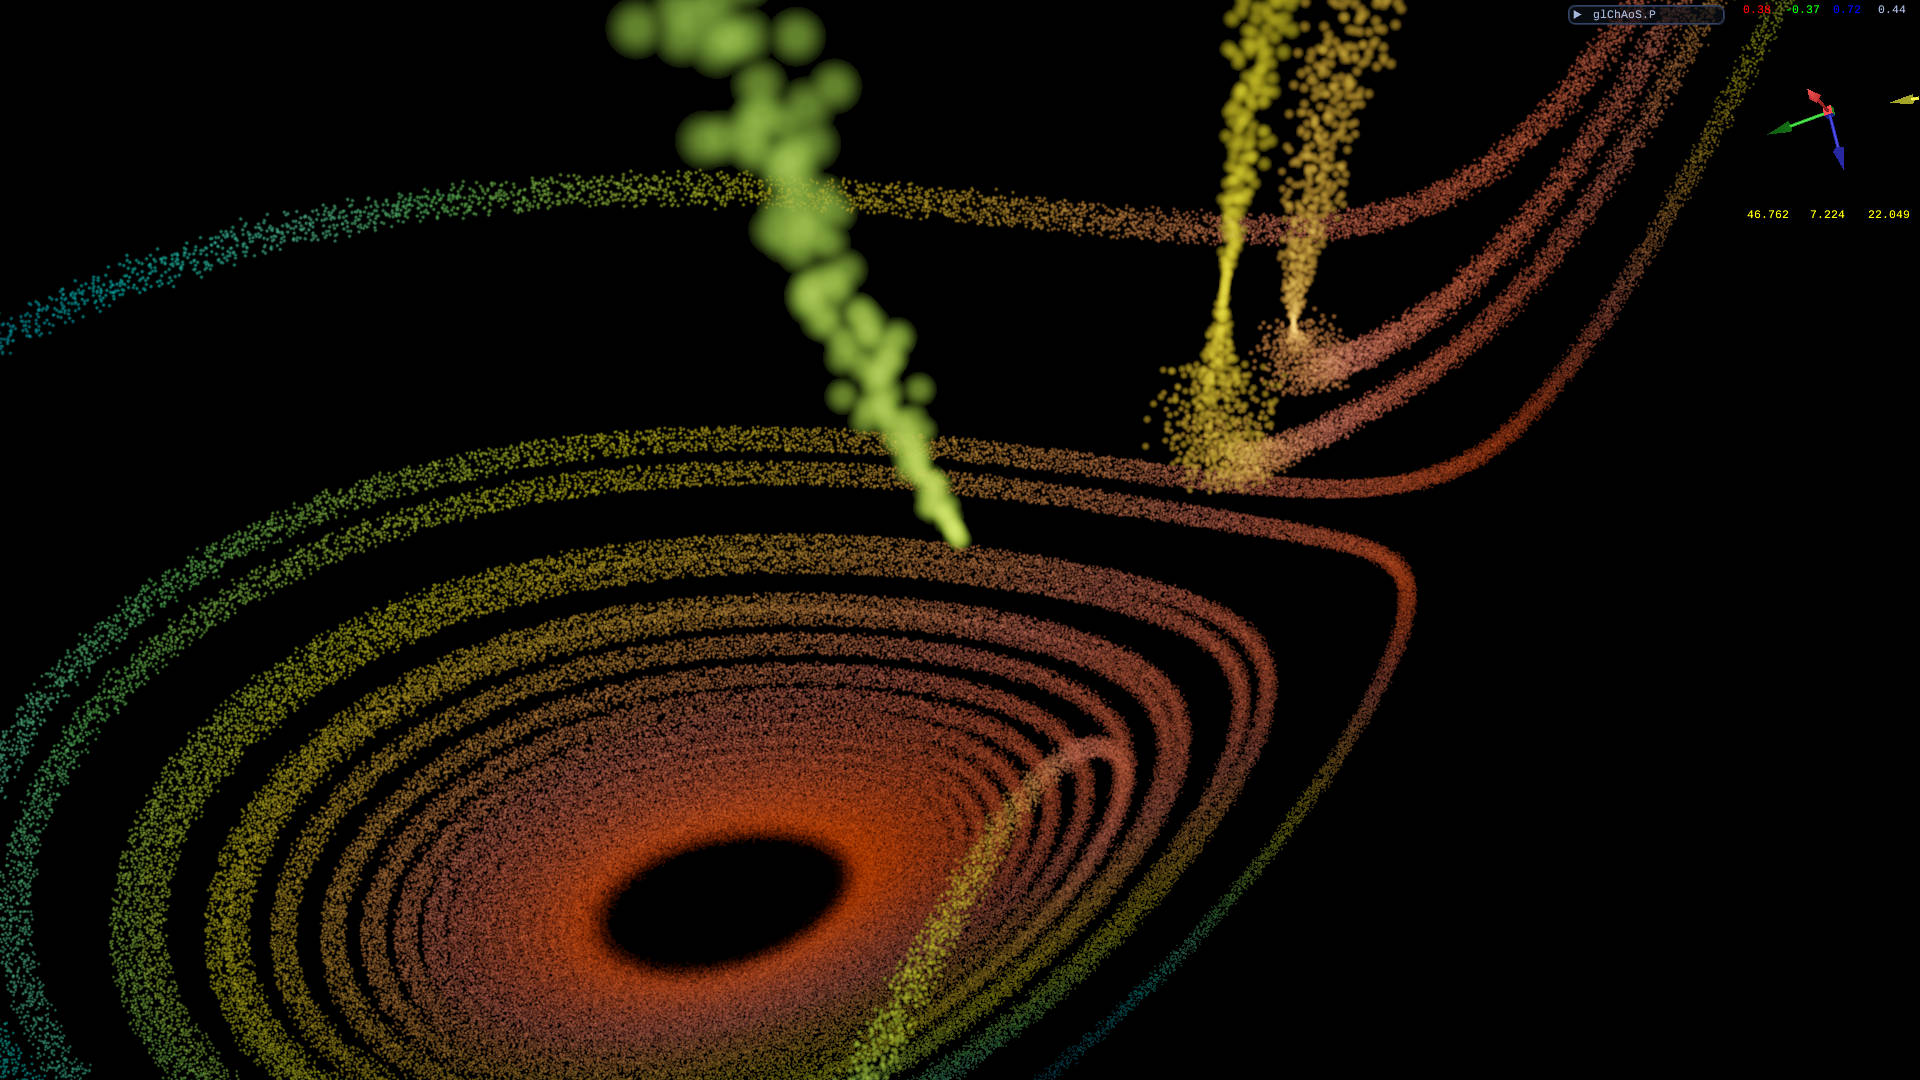 GitHub - BrutPitt/: 3D GPUs Strange Attractors and Hypercomplex  Fractals explorer - up to 256 Million particles in RealTime